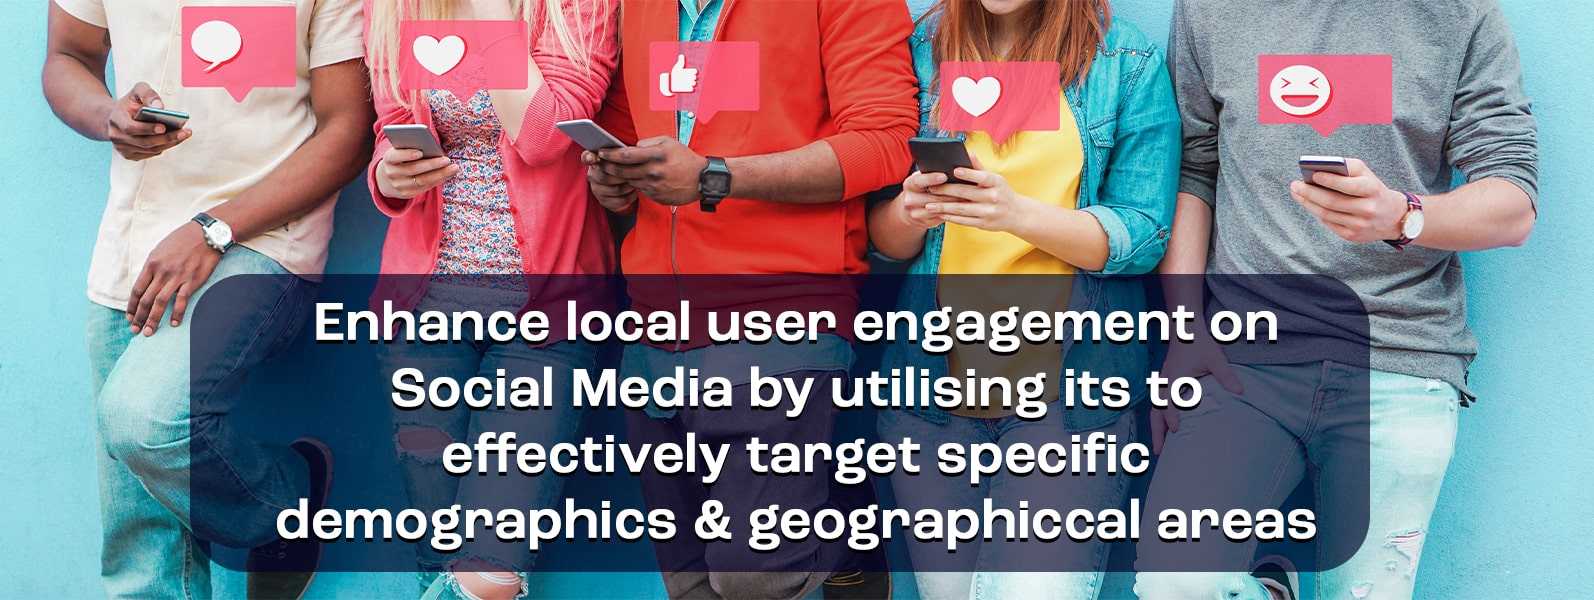 enhance user engagement using social media to target specific demographics and geographical areas